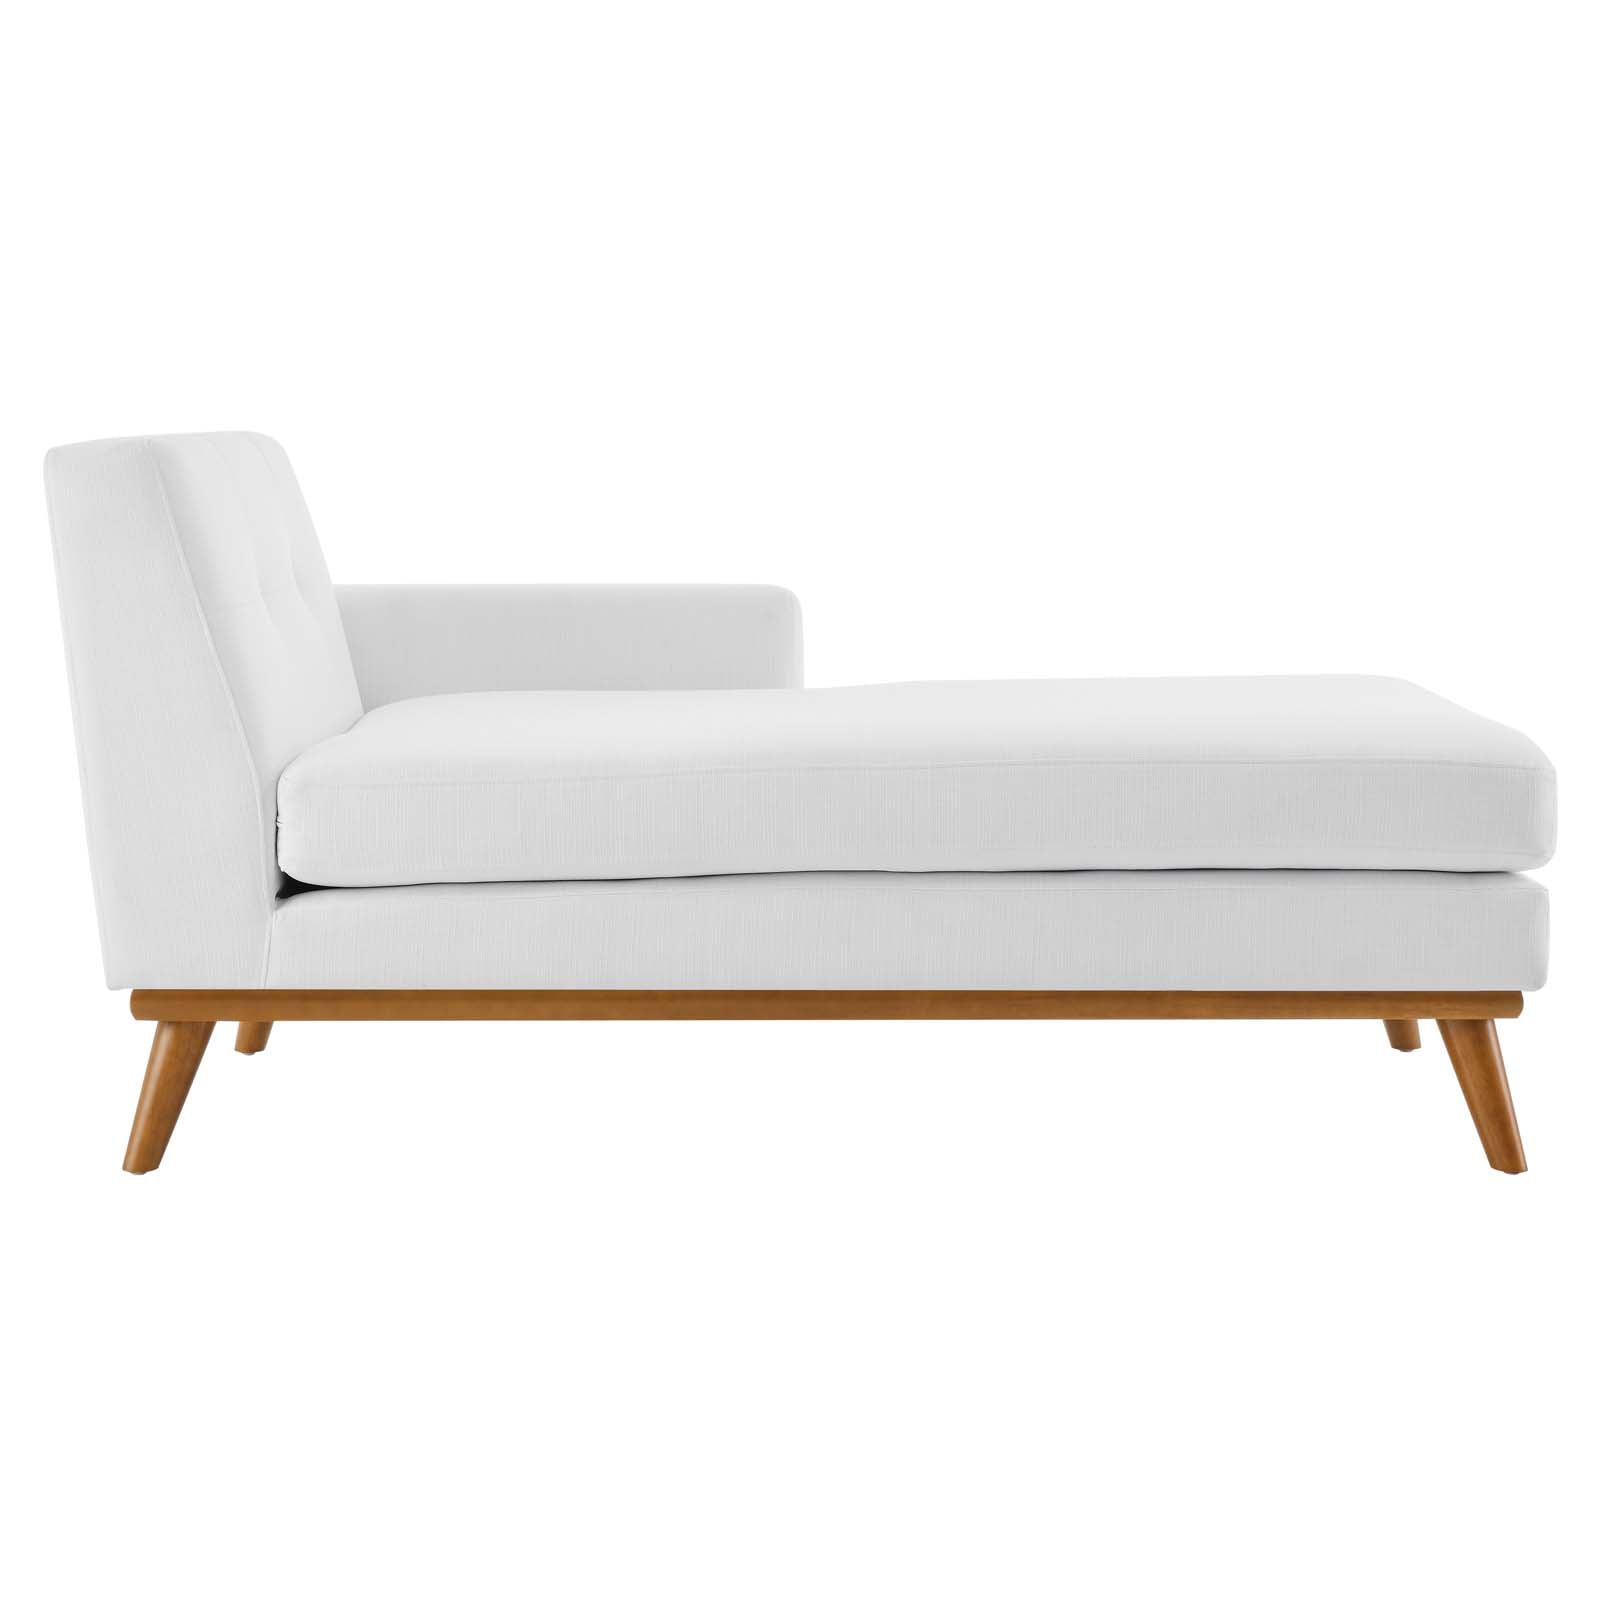 Modway Sleepers & Futons - Engage Right-Facing Upholstered Fabric Chaise White